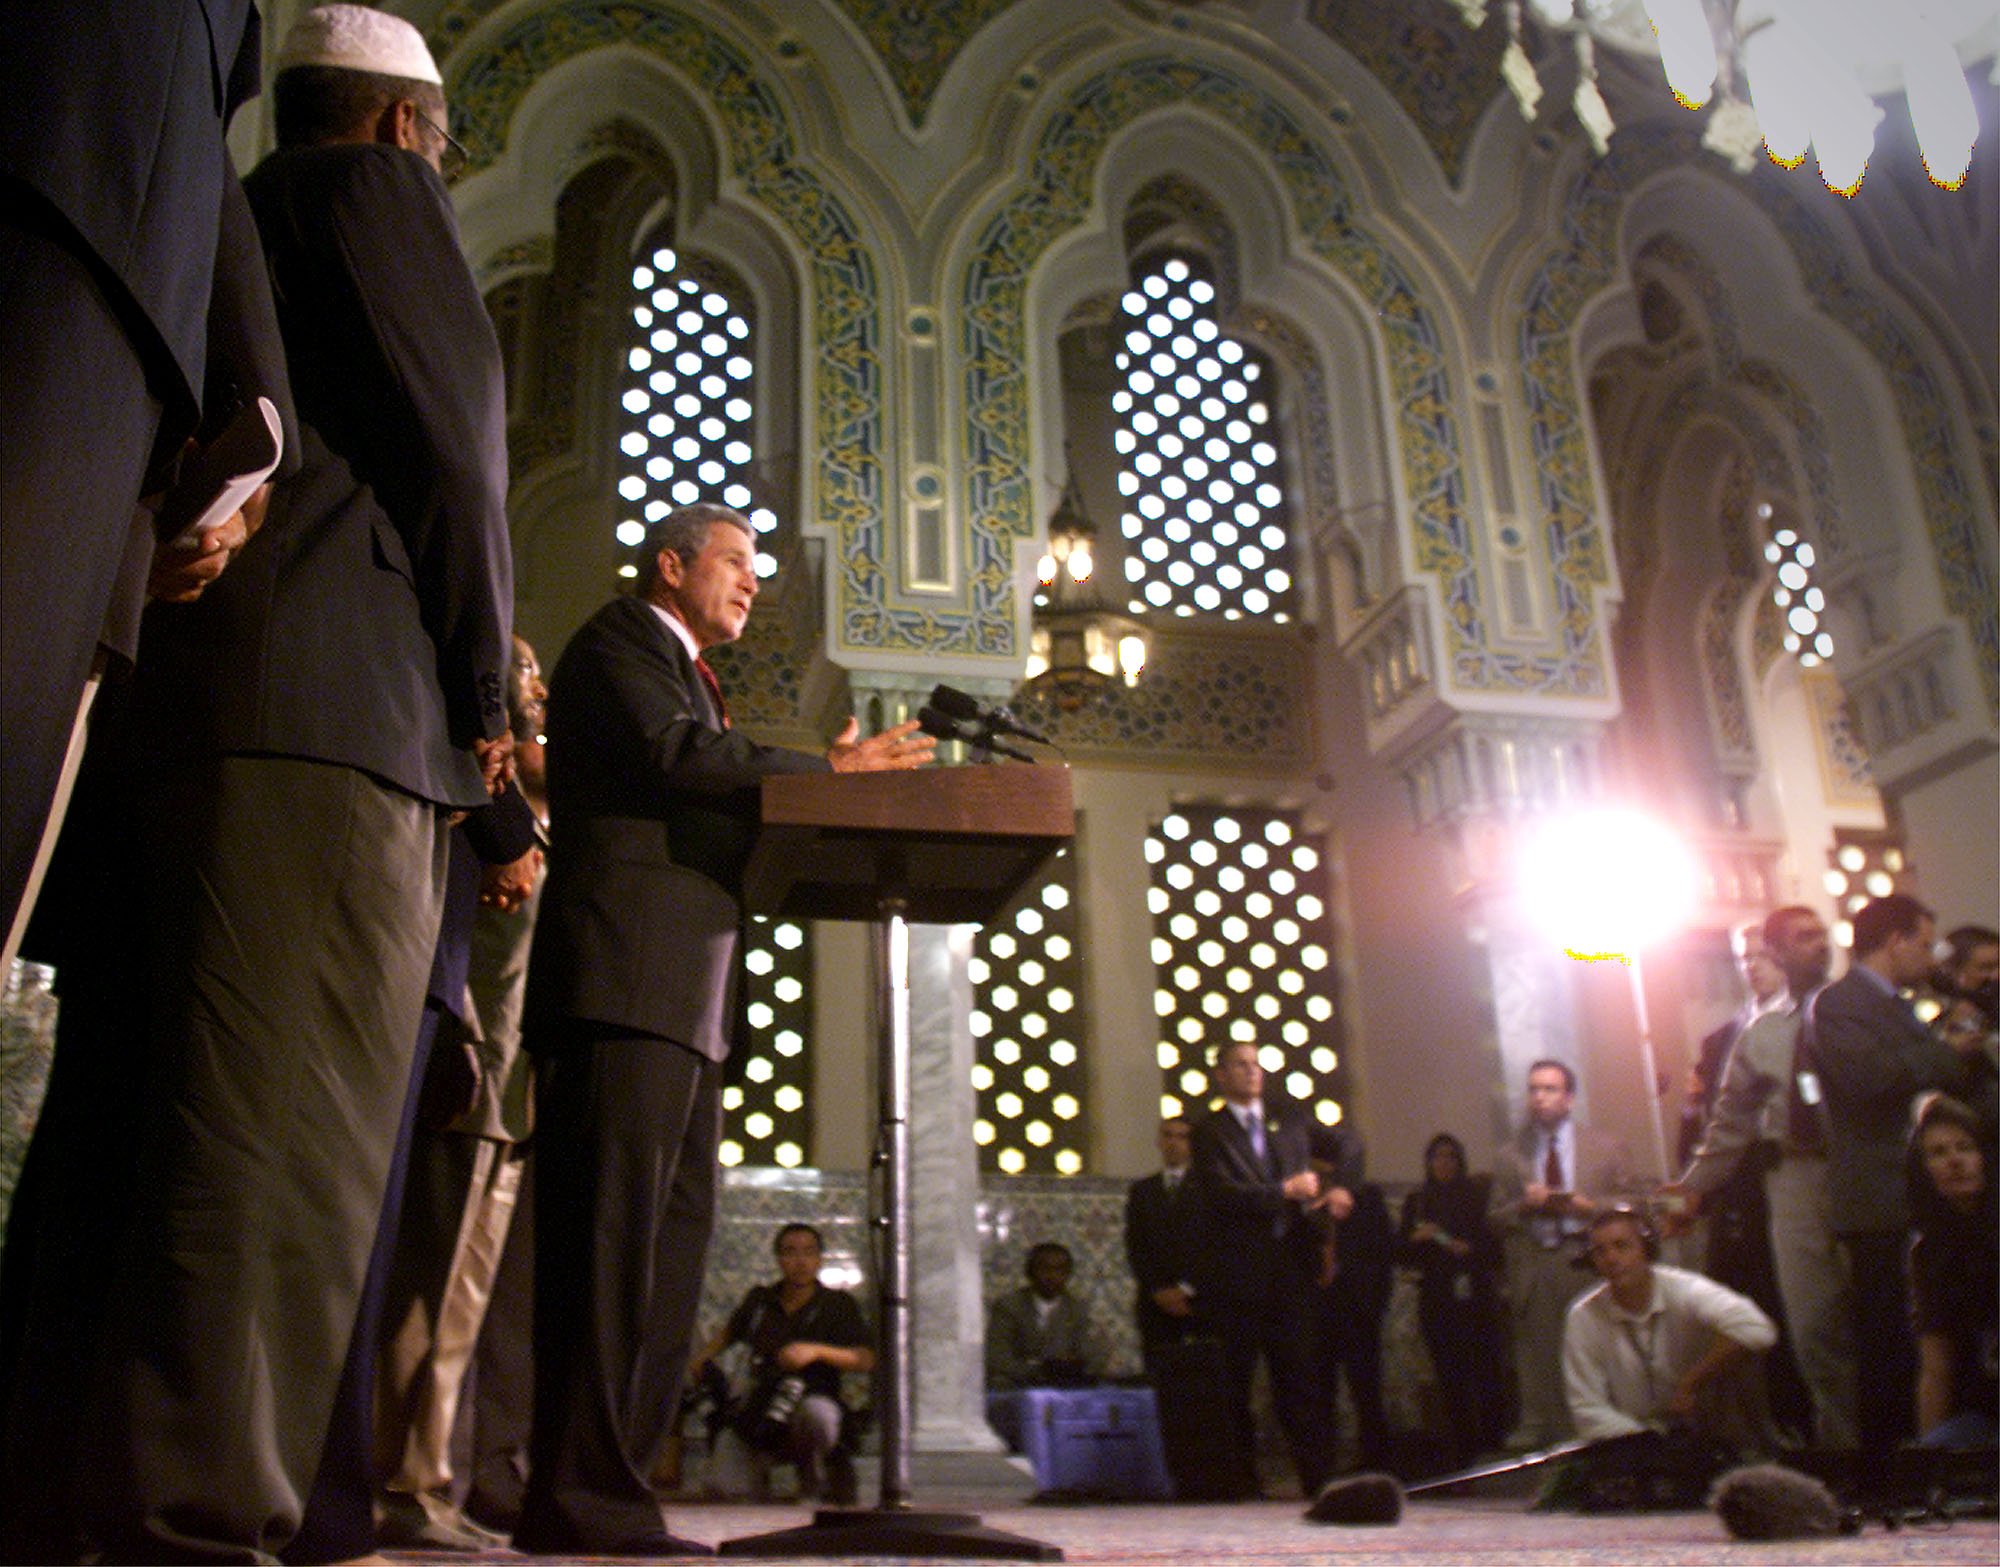 President Bush speaks to the press during his visit to the Mosque at the Islamic Center in Washington, D.C., on Monday, September 17, 2001. (PHOTOGRAPH BY CHUCK KENNEDY)